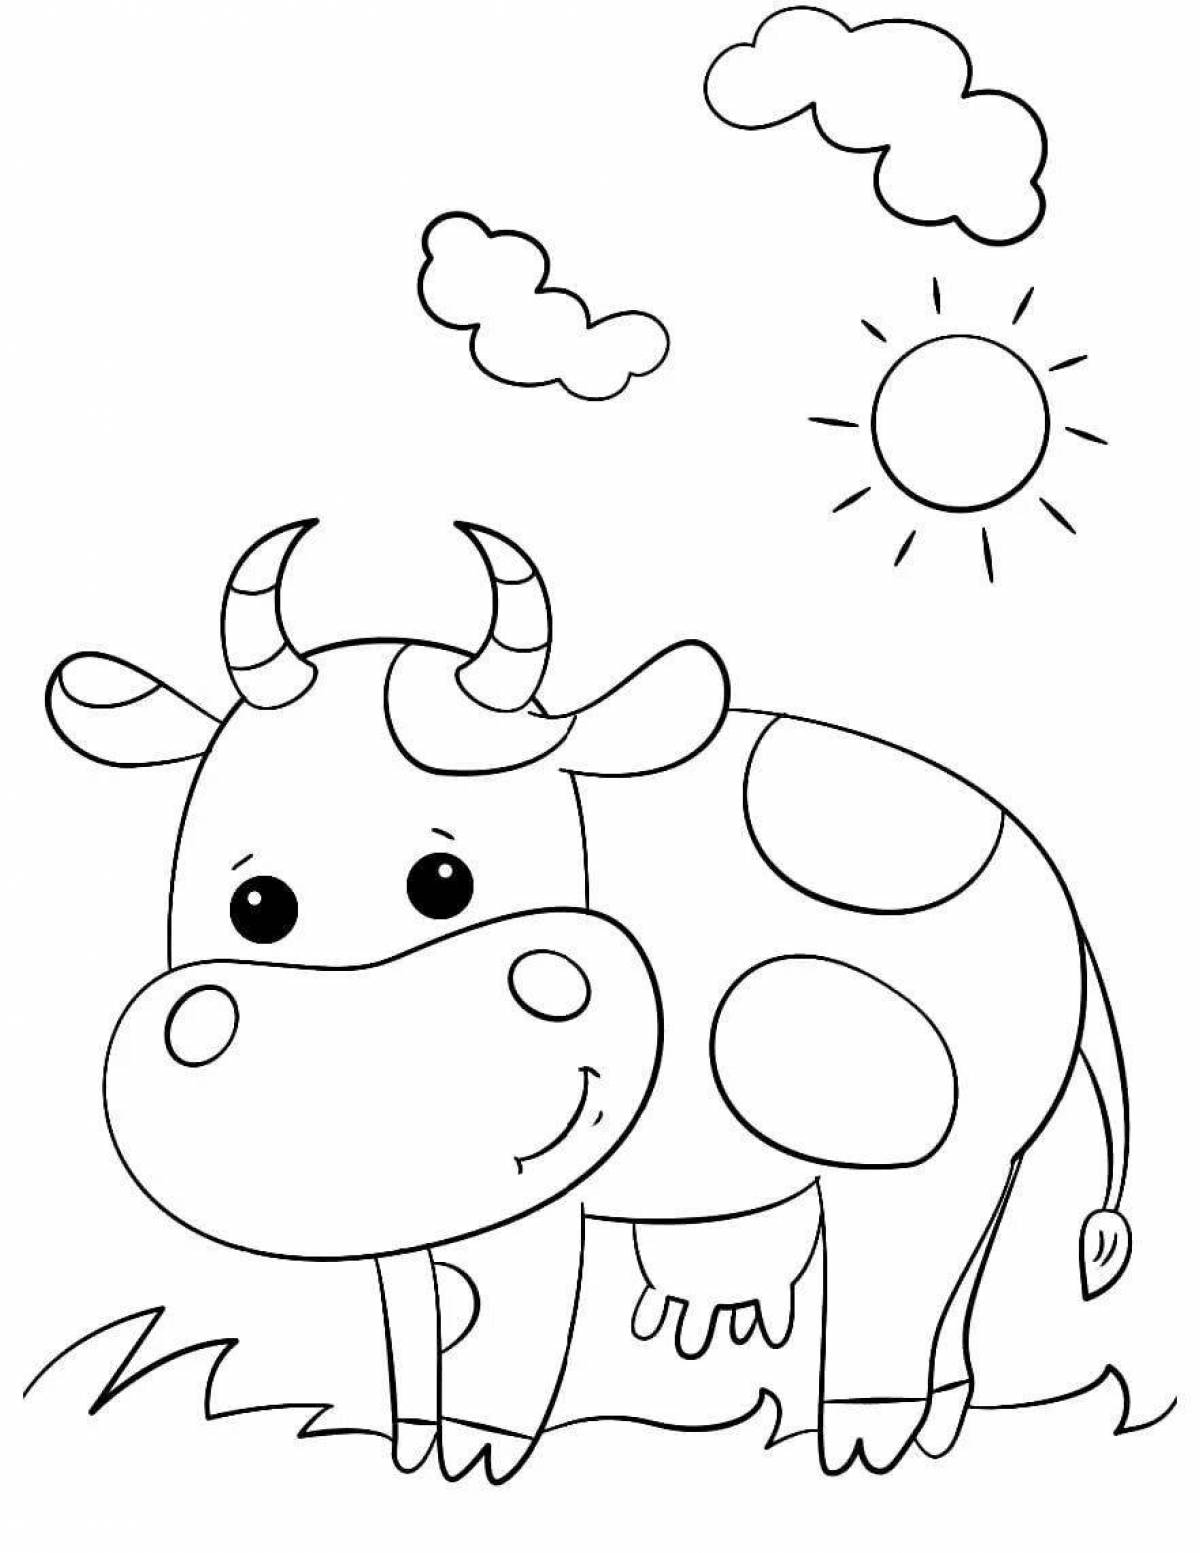 Coloring book smiling cute cow